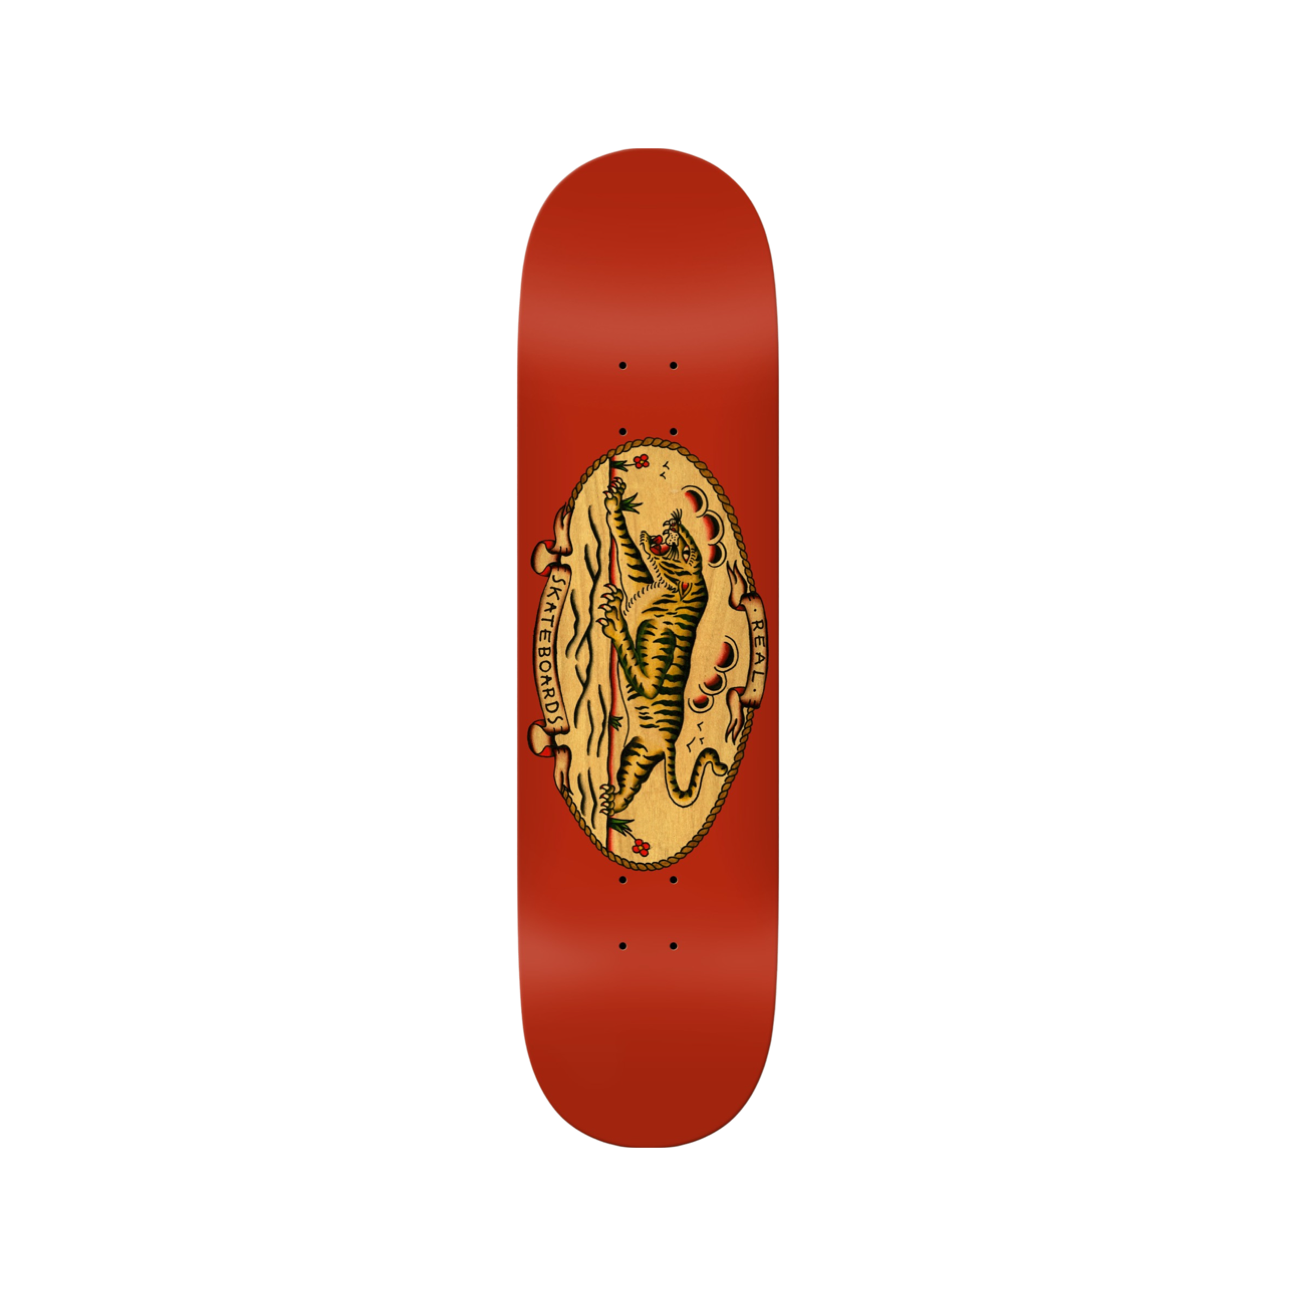 REAL - HARRY LINTELL TIGER OVAL DECK - 8.38"